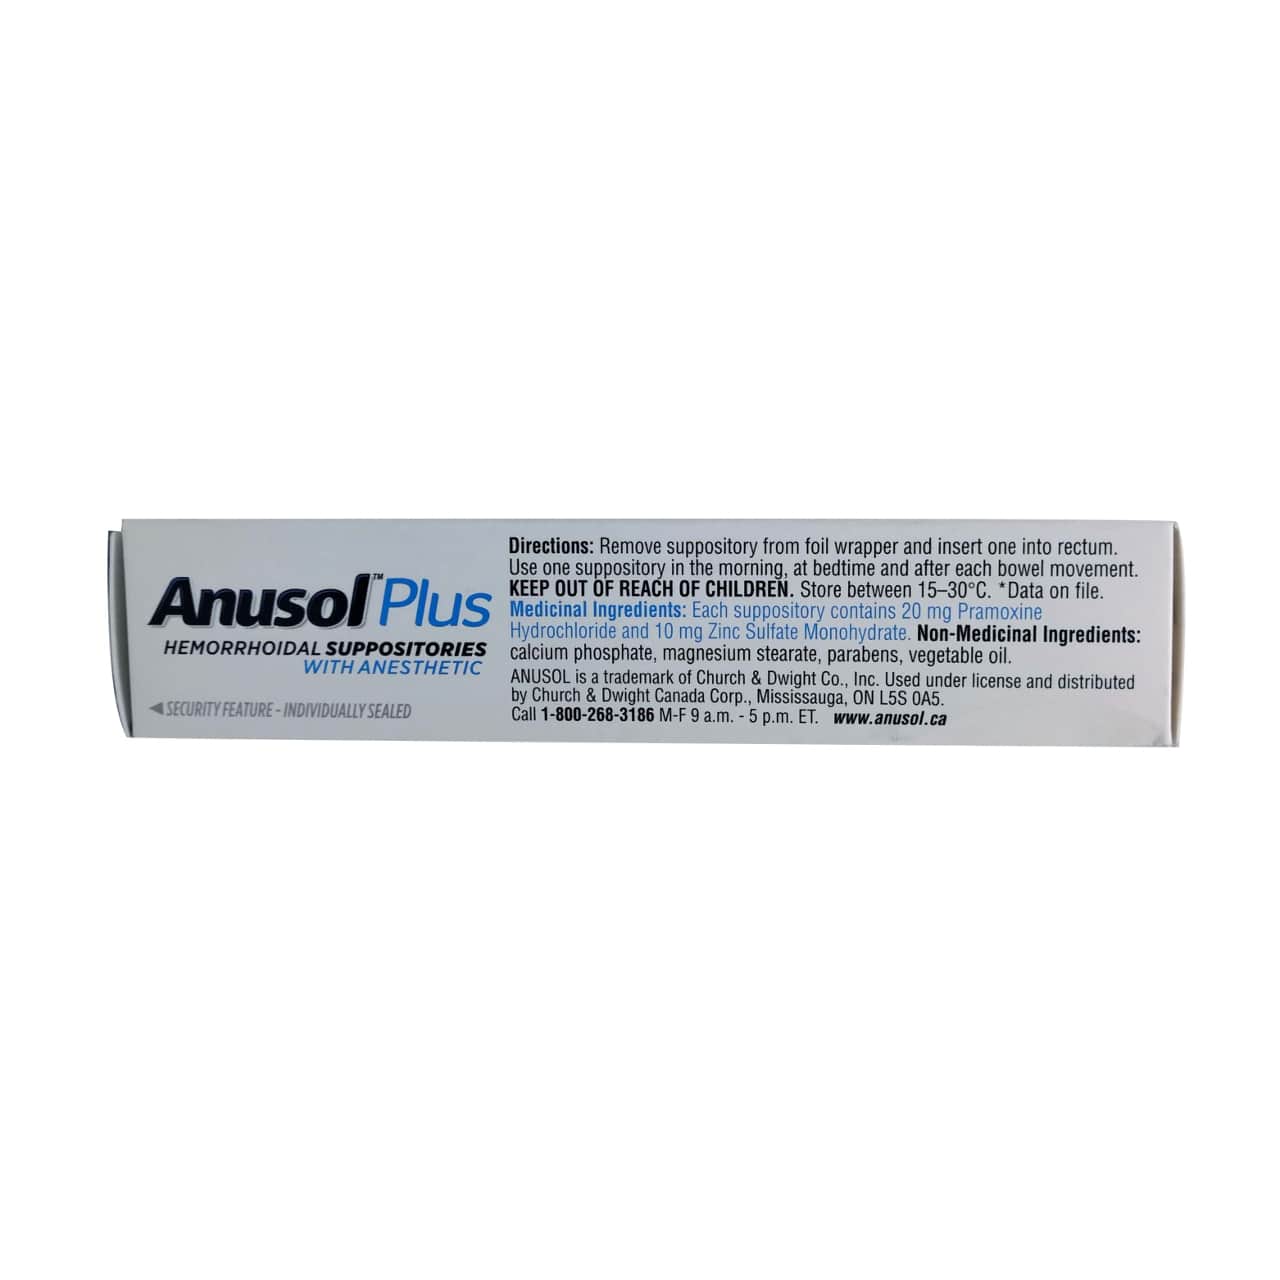 Directions and ingredients for Anusol Plus Hemorrhoidal Suppositories with Anesthetic (12 suppositories) in English